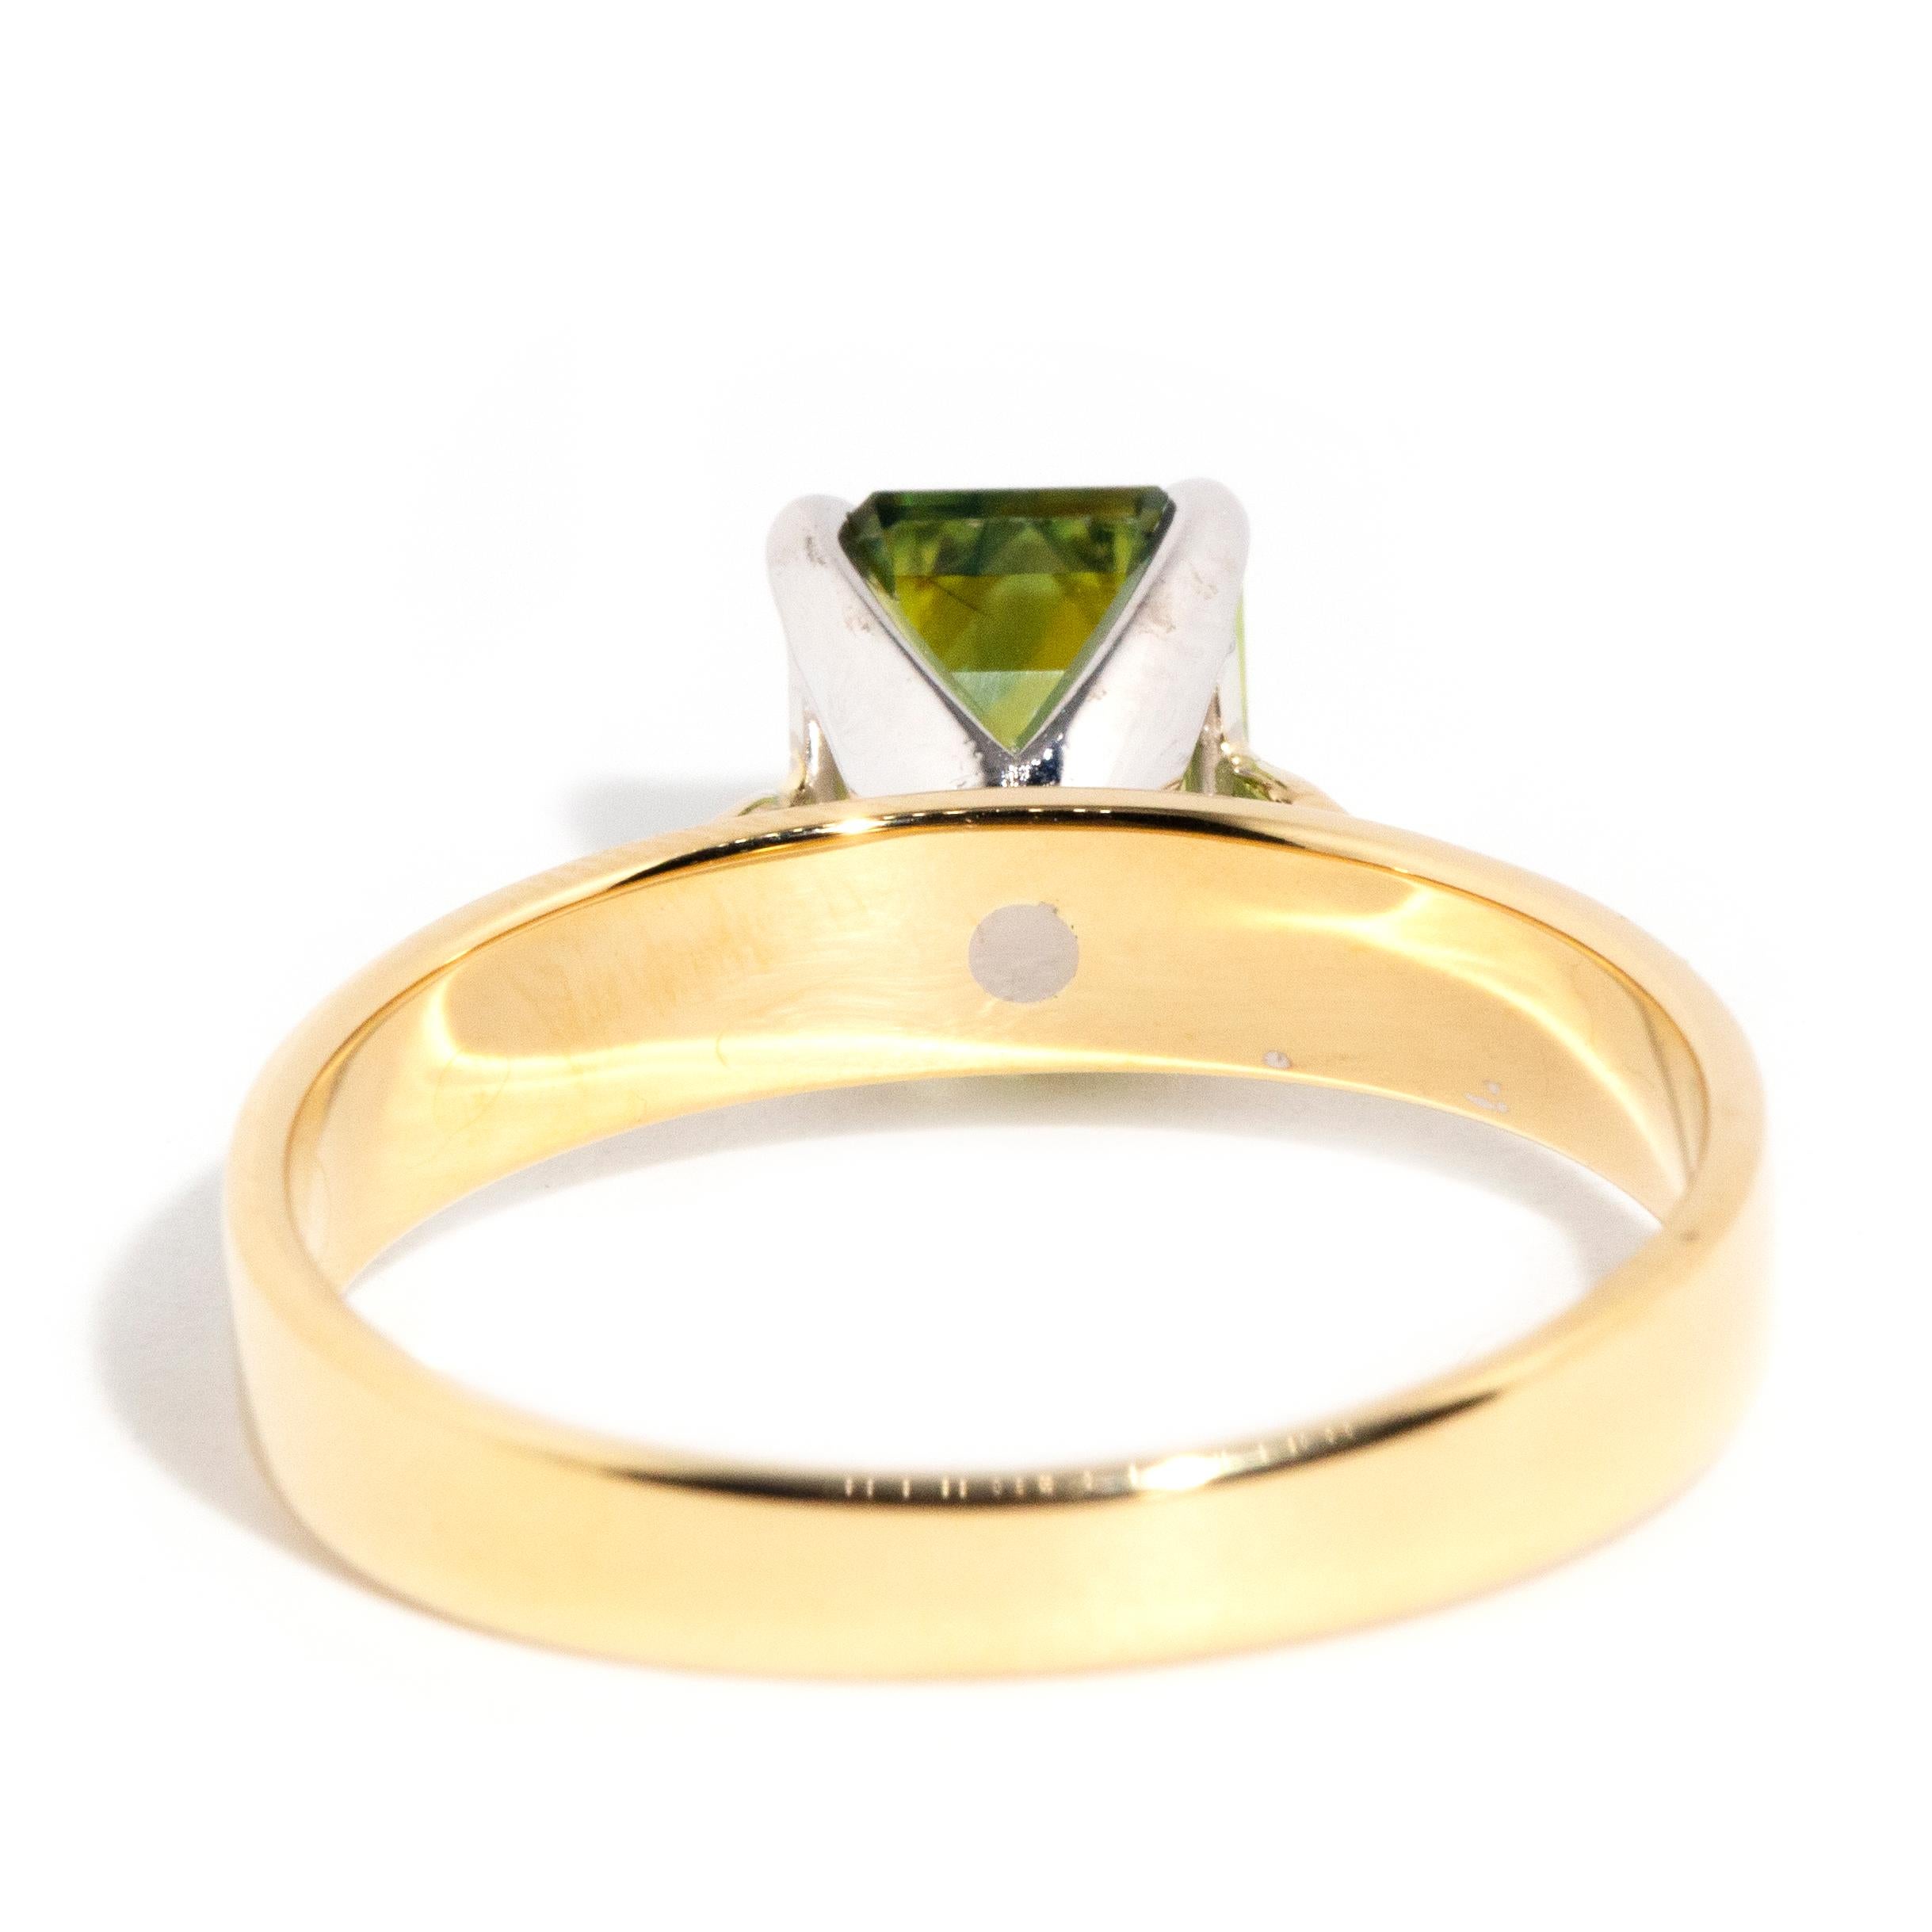 Vintage 1990s 18 Carat Yellow Gold Emerald Cut Parti Sapphire Solitaire Ring2 4